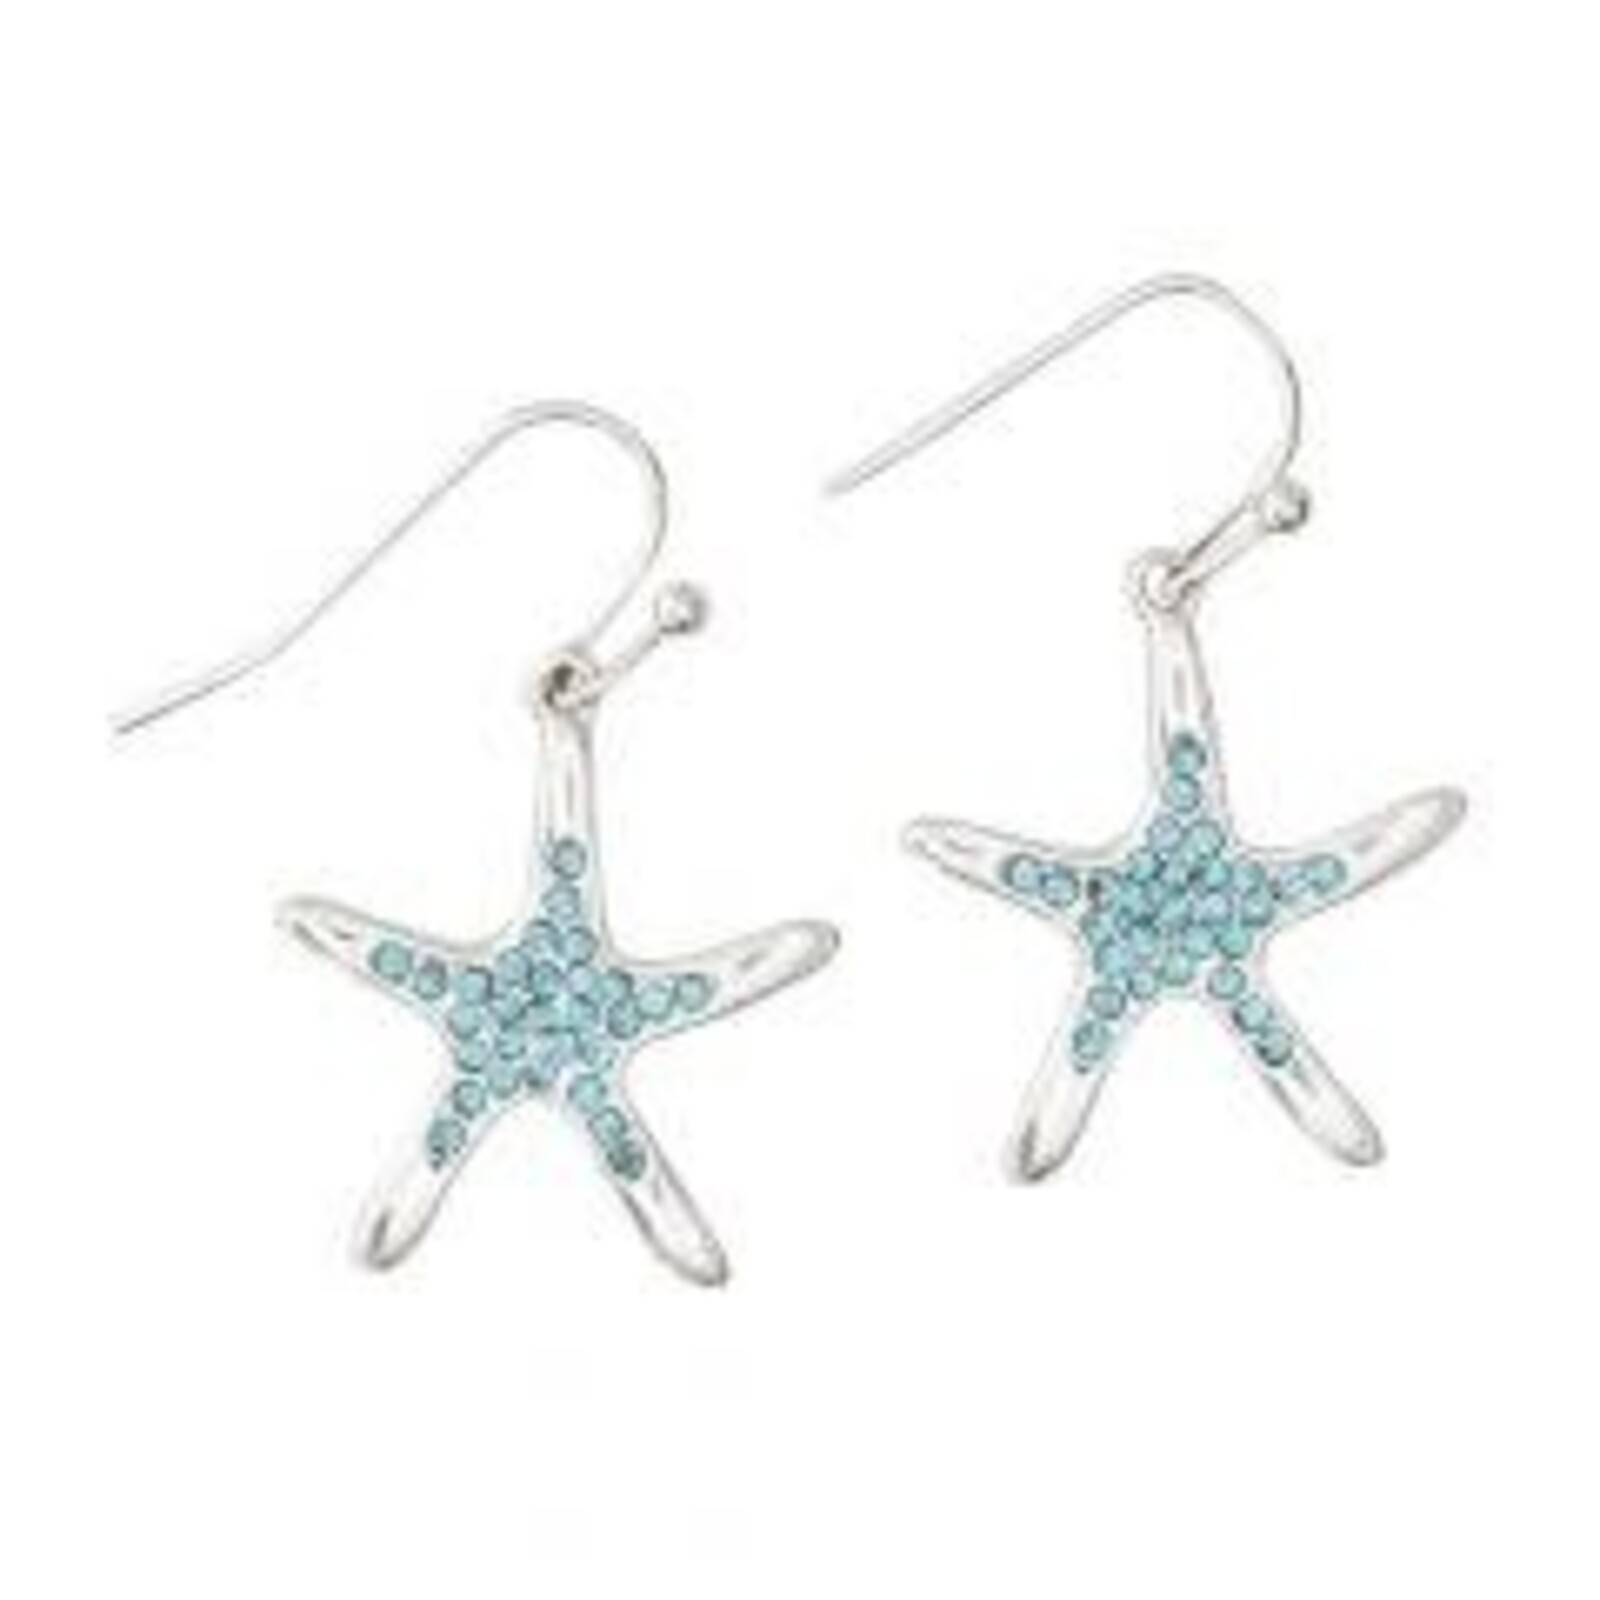 Periwinkle by Barlow Earrings-Starfish with Blue Crystals   8109022 loading=